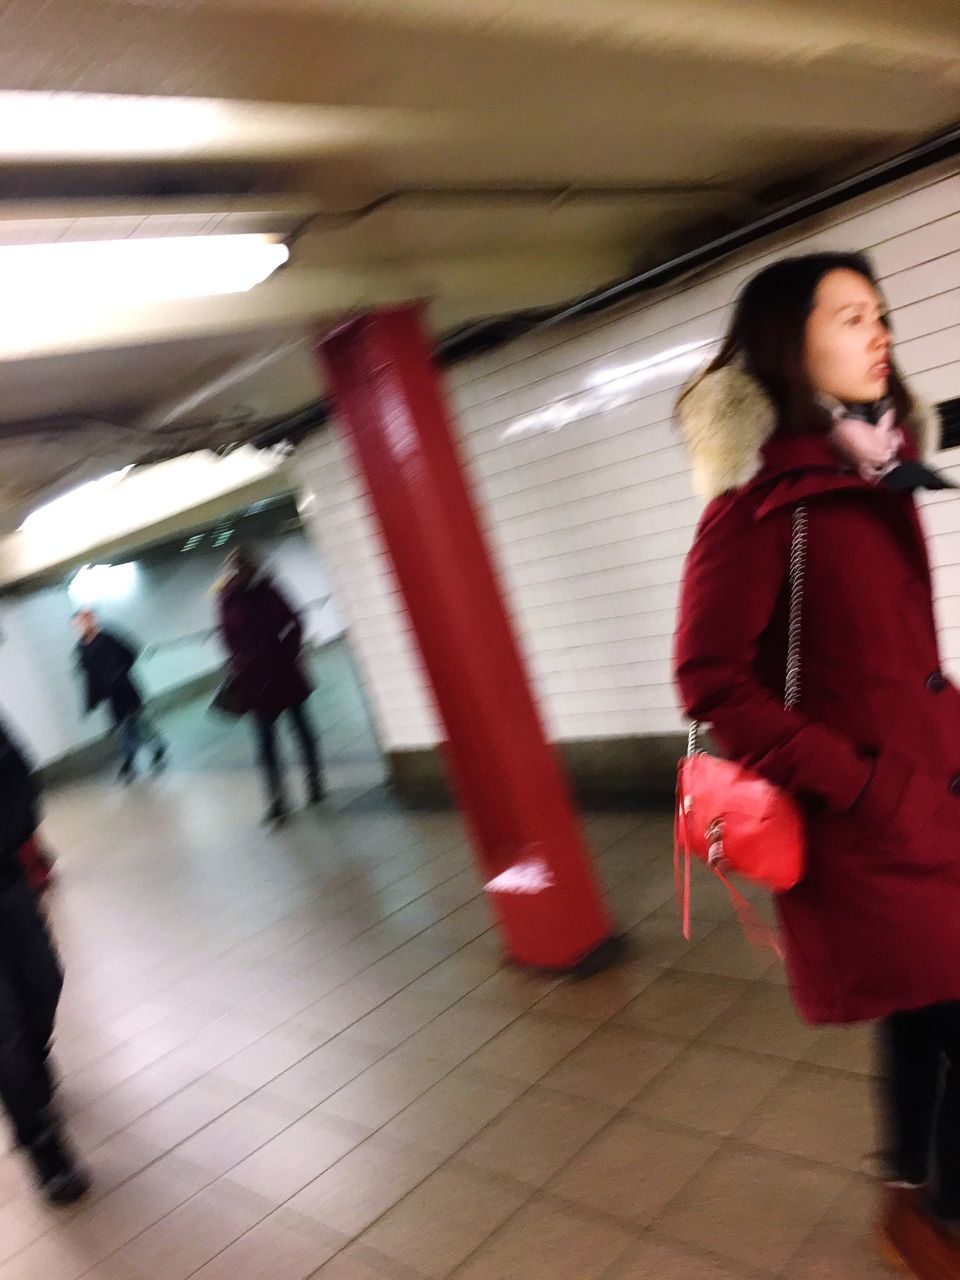 indoors, blurred motion, red, one person, subway train, commuter, people, real people, illuminated, public transportation, day, adults only, adult